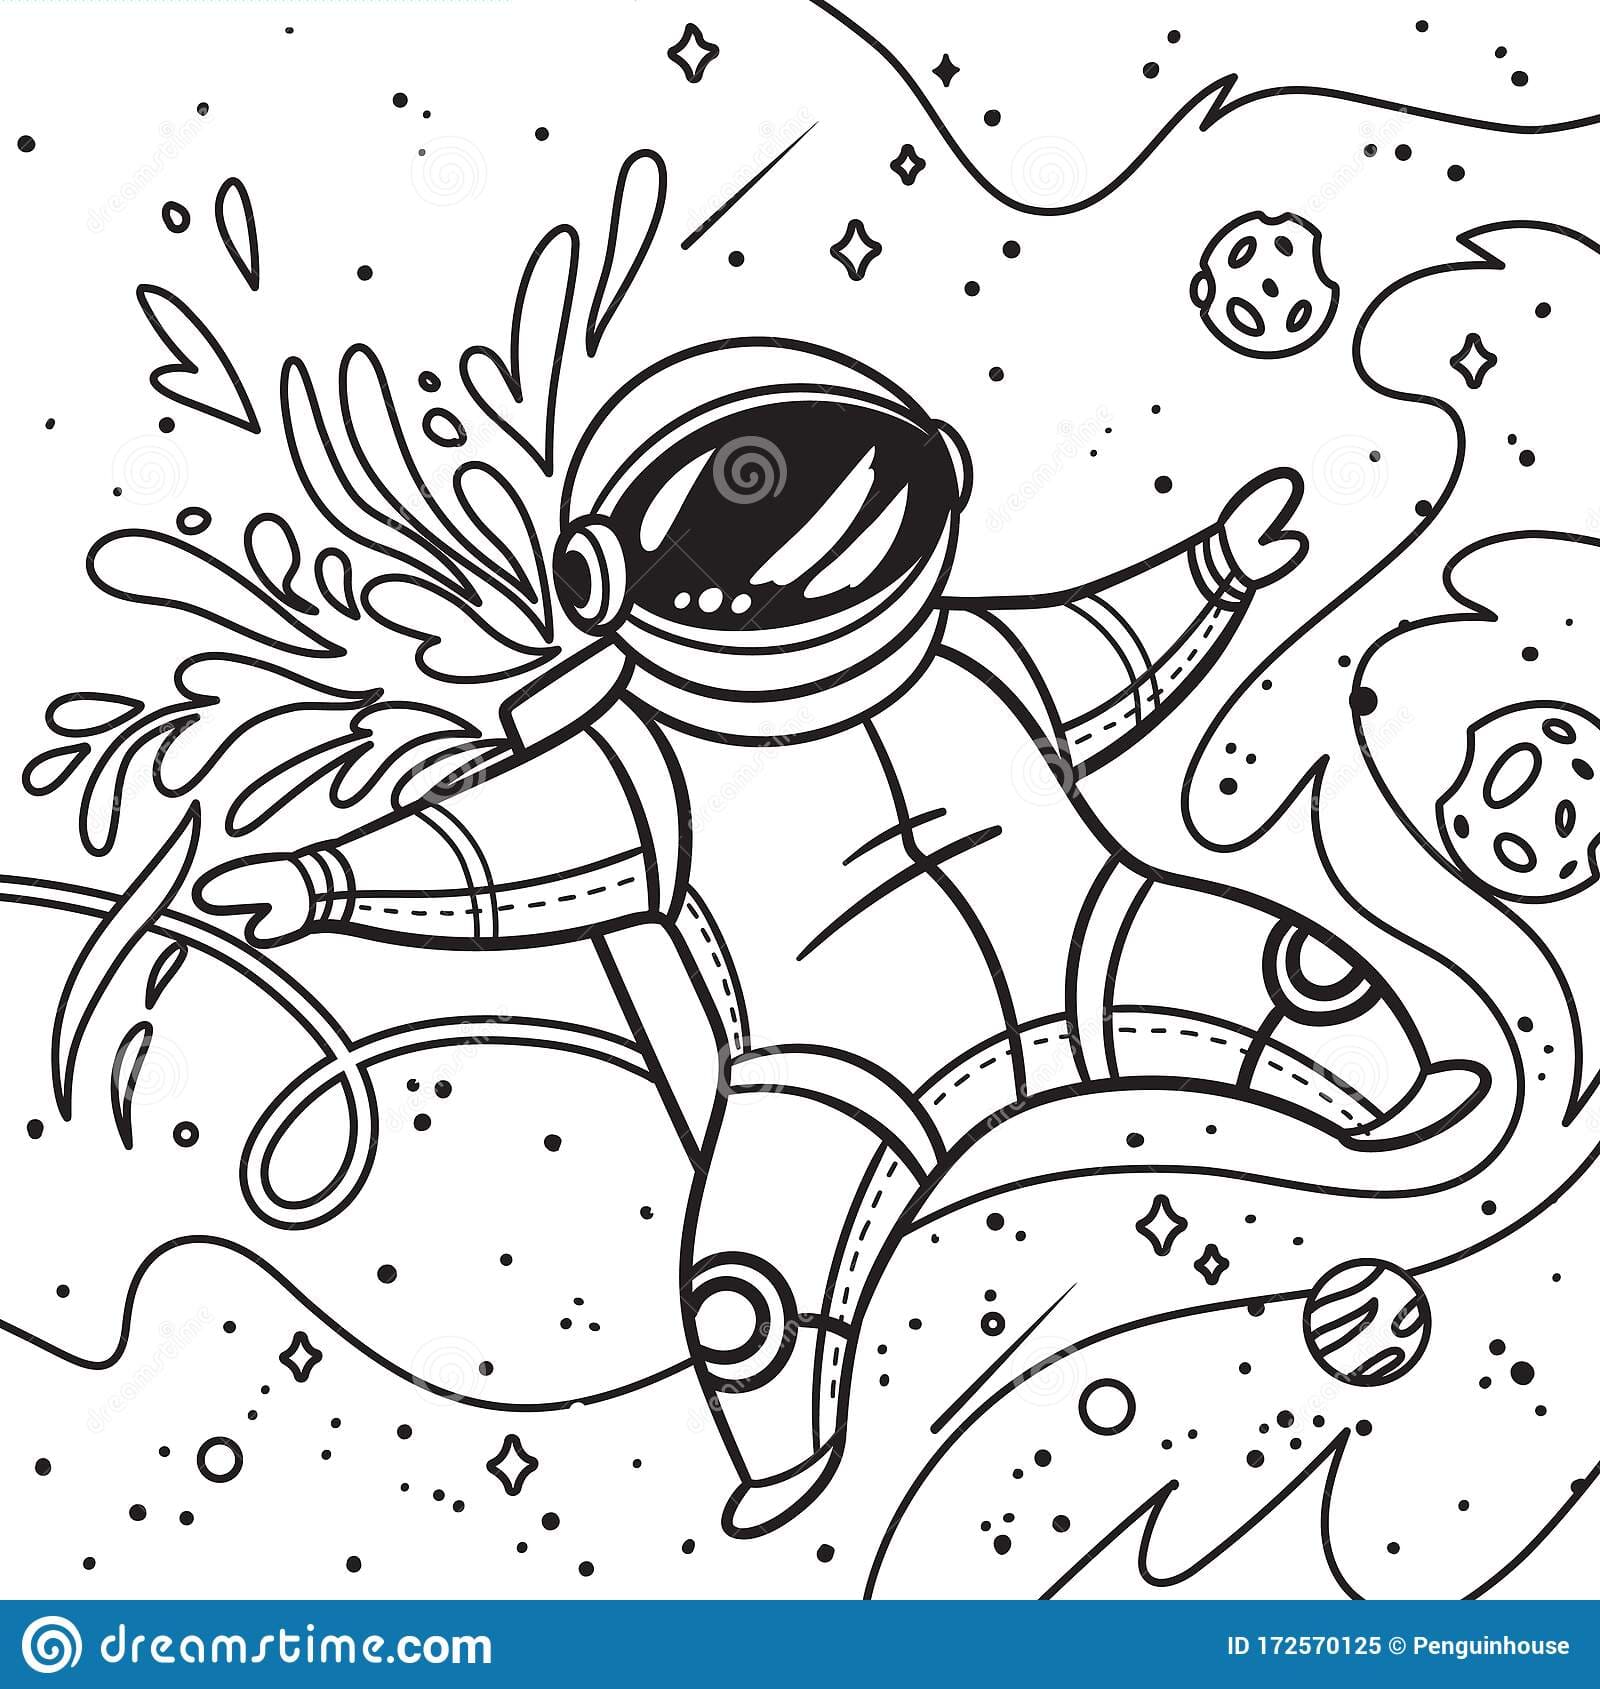 Contour print with cartoon astronaut flies with leaves in outer space